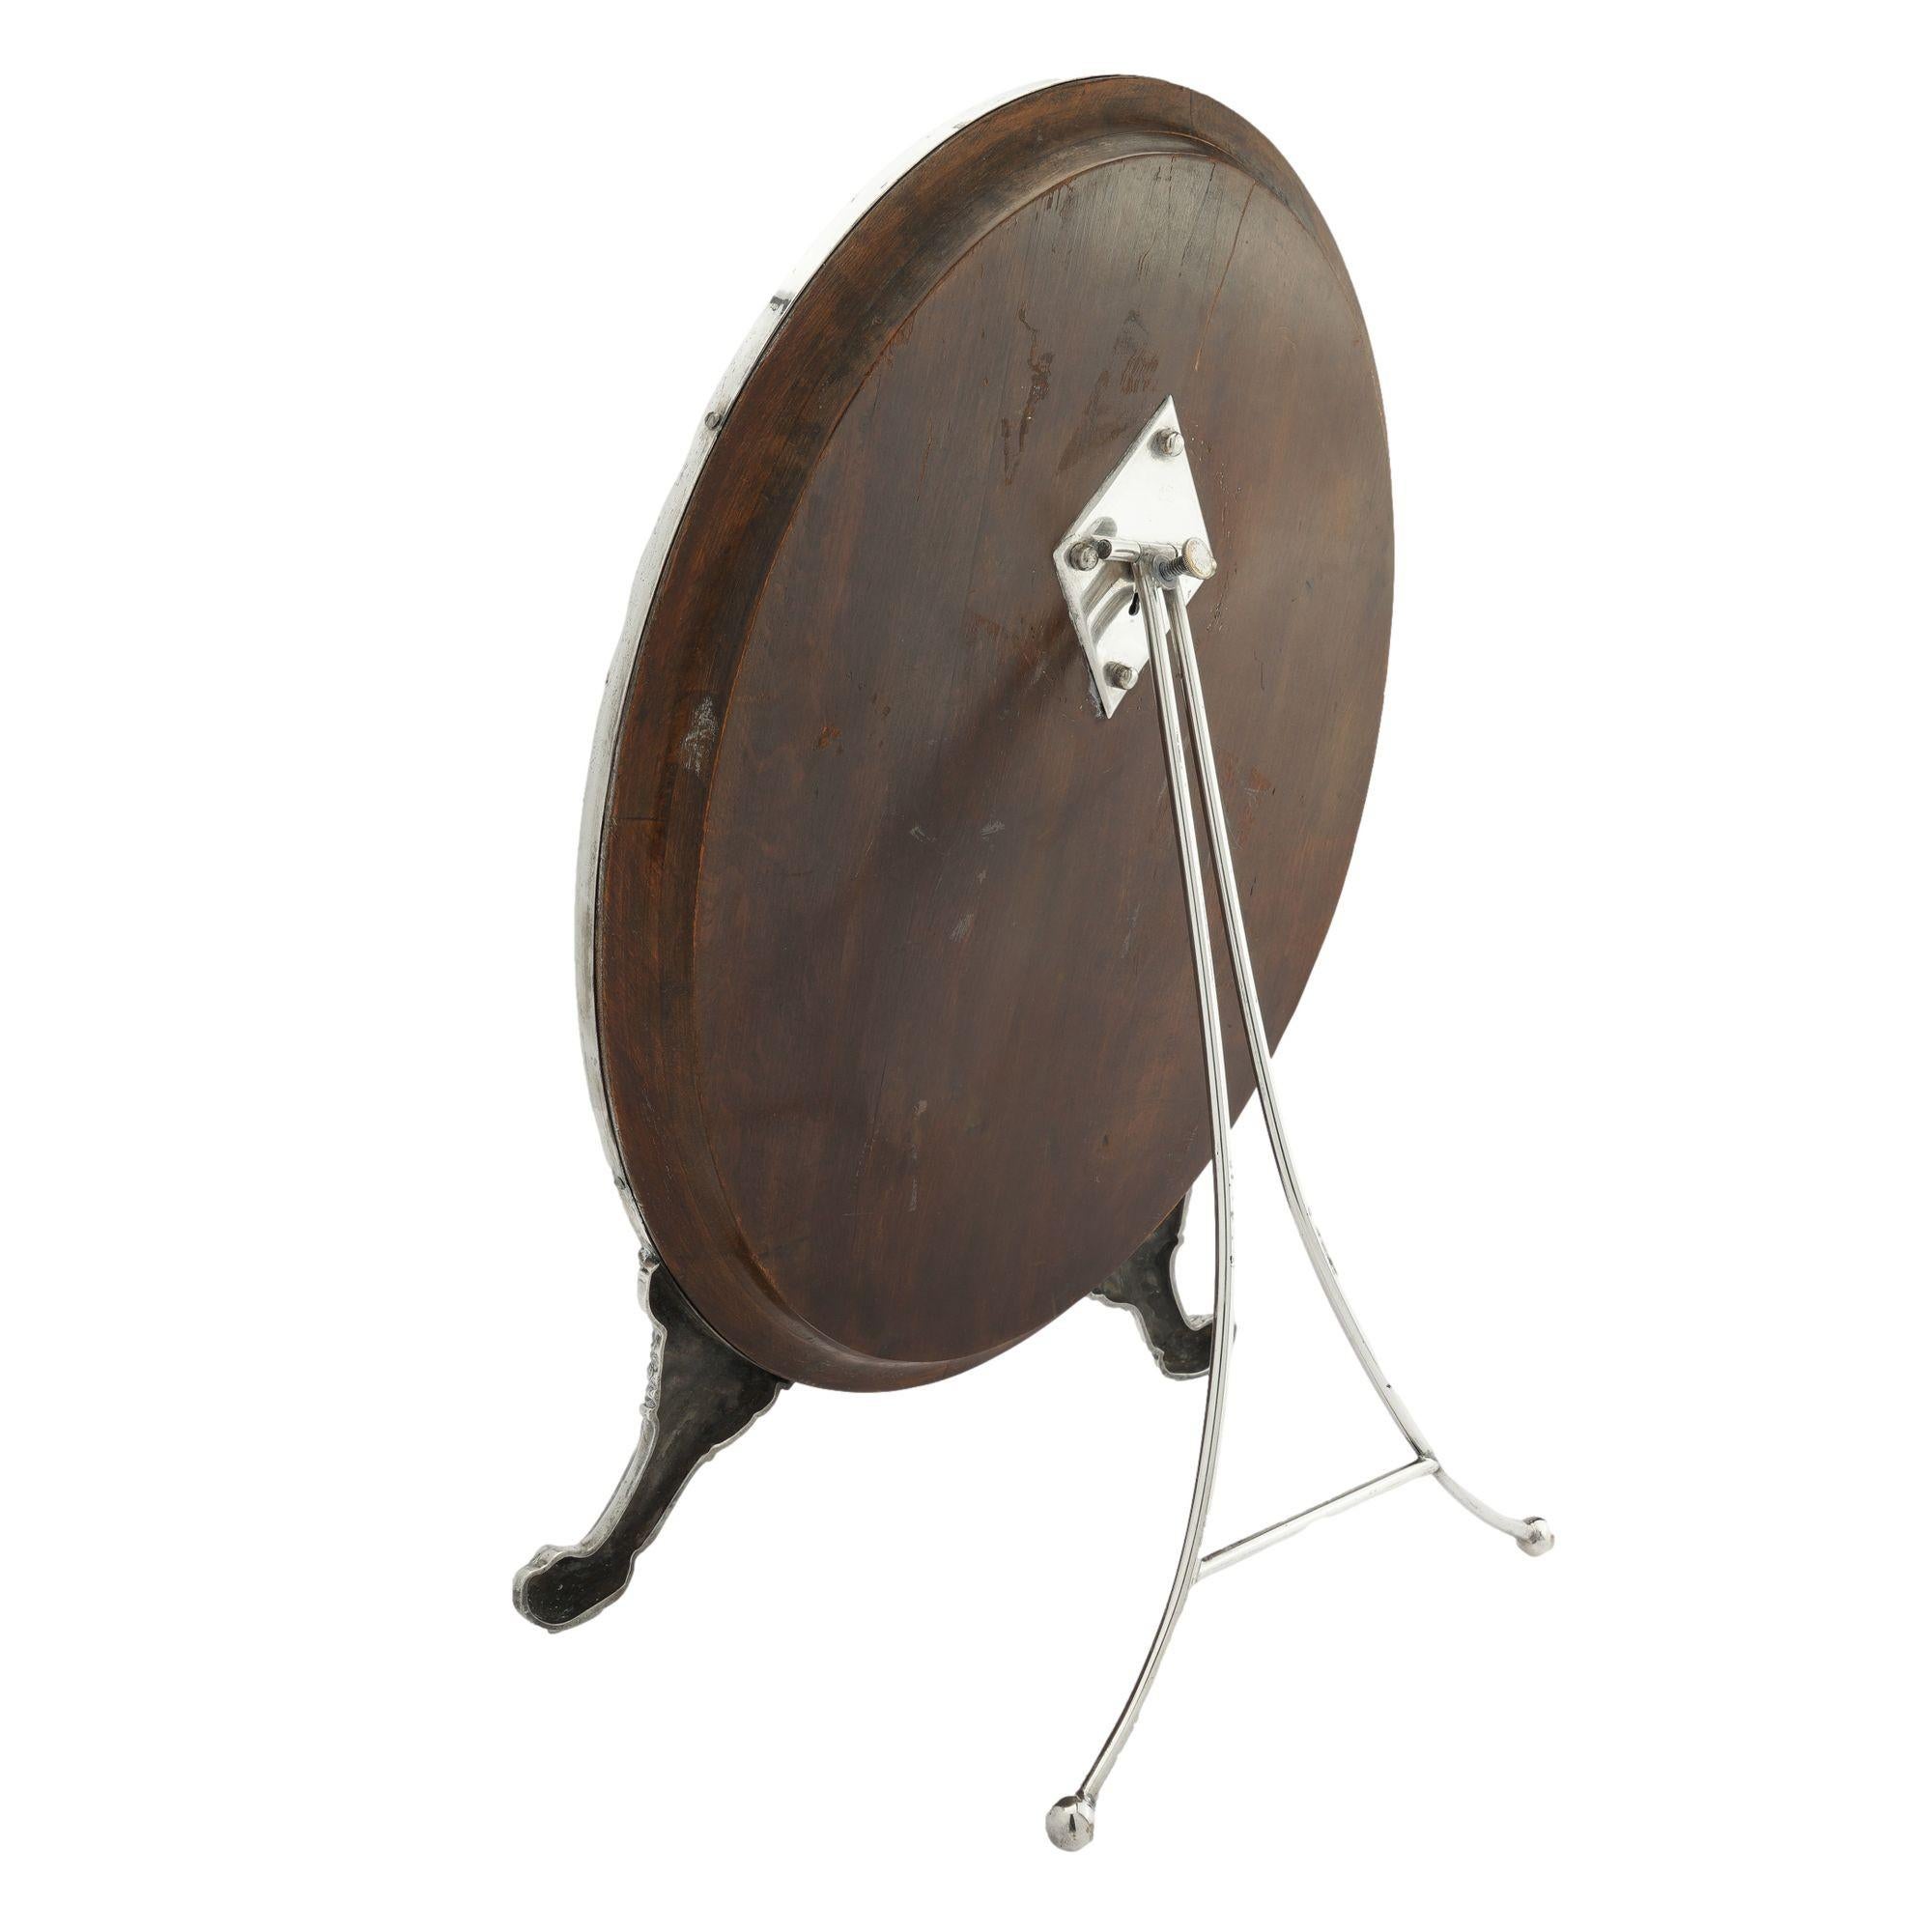 20th Century Oval easel back dressing mirror attributed to the Norblin Metal Works, 1880-1900